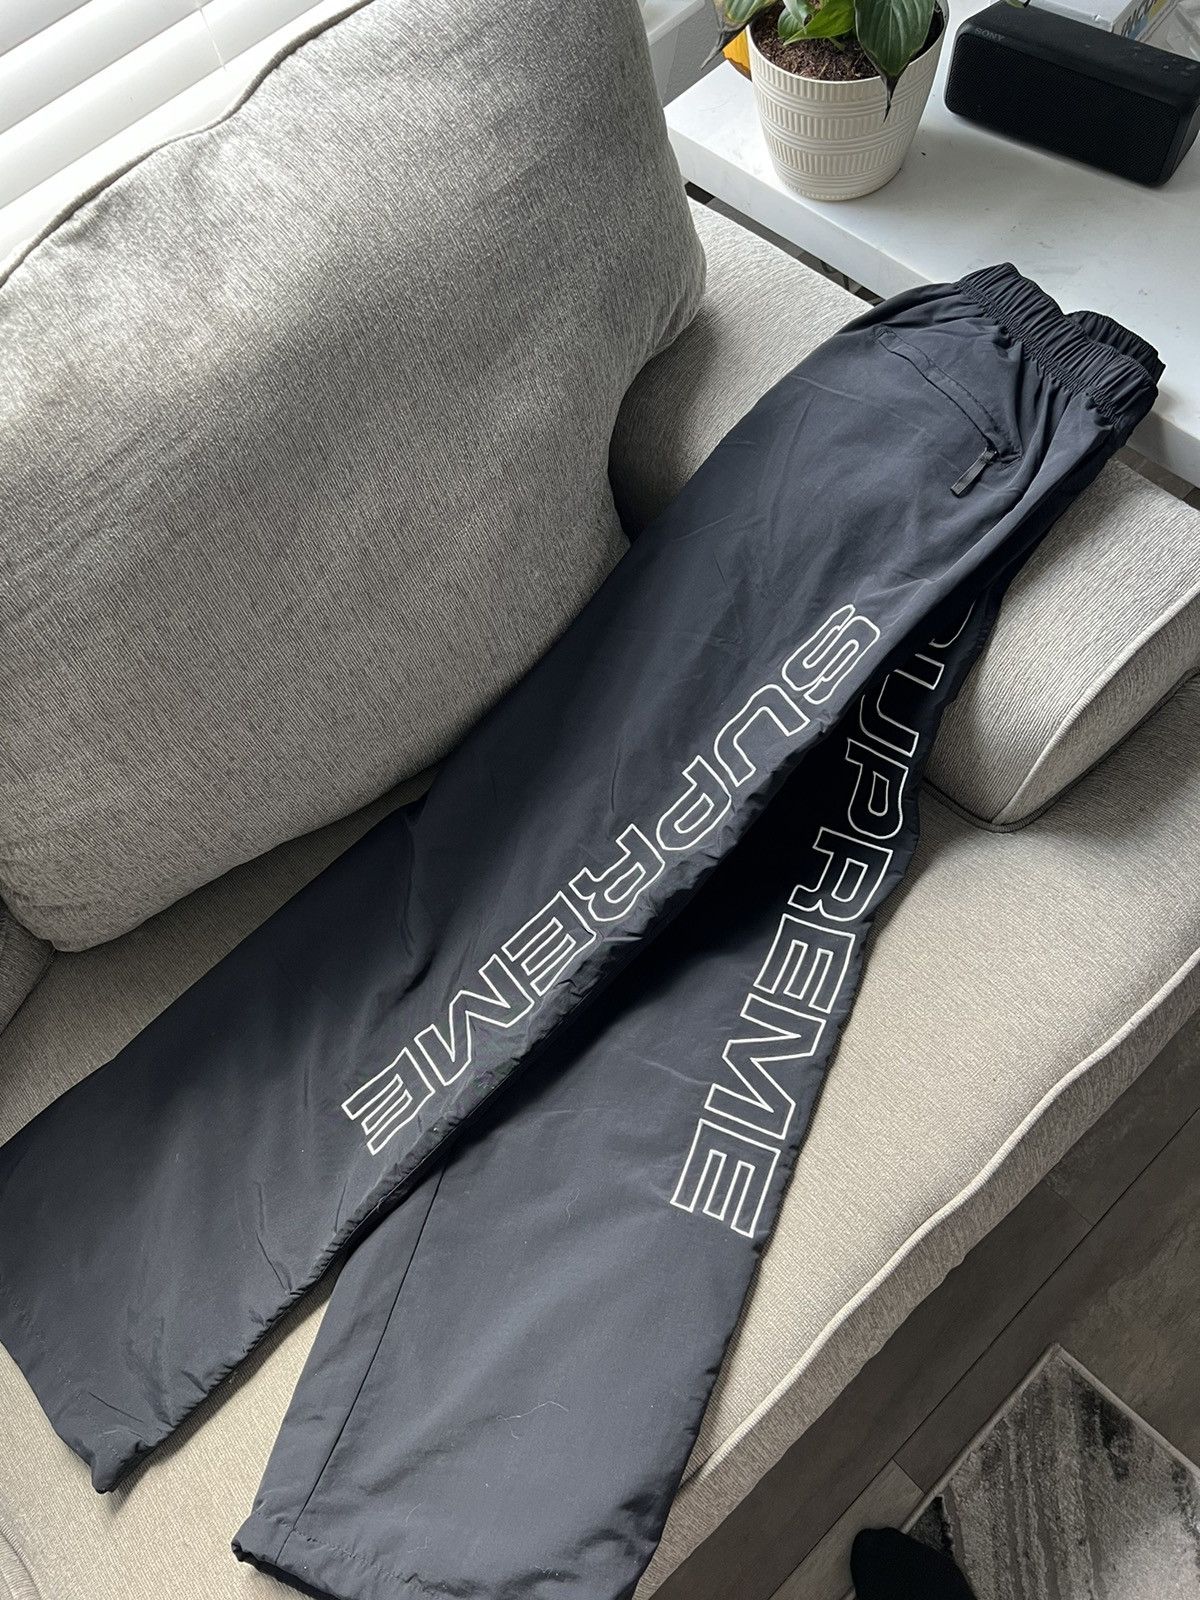 SUPREME SPELLOUT EMBROIDERED TRACK PANT – Trade Point_HK